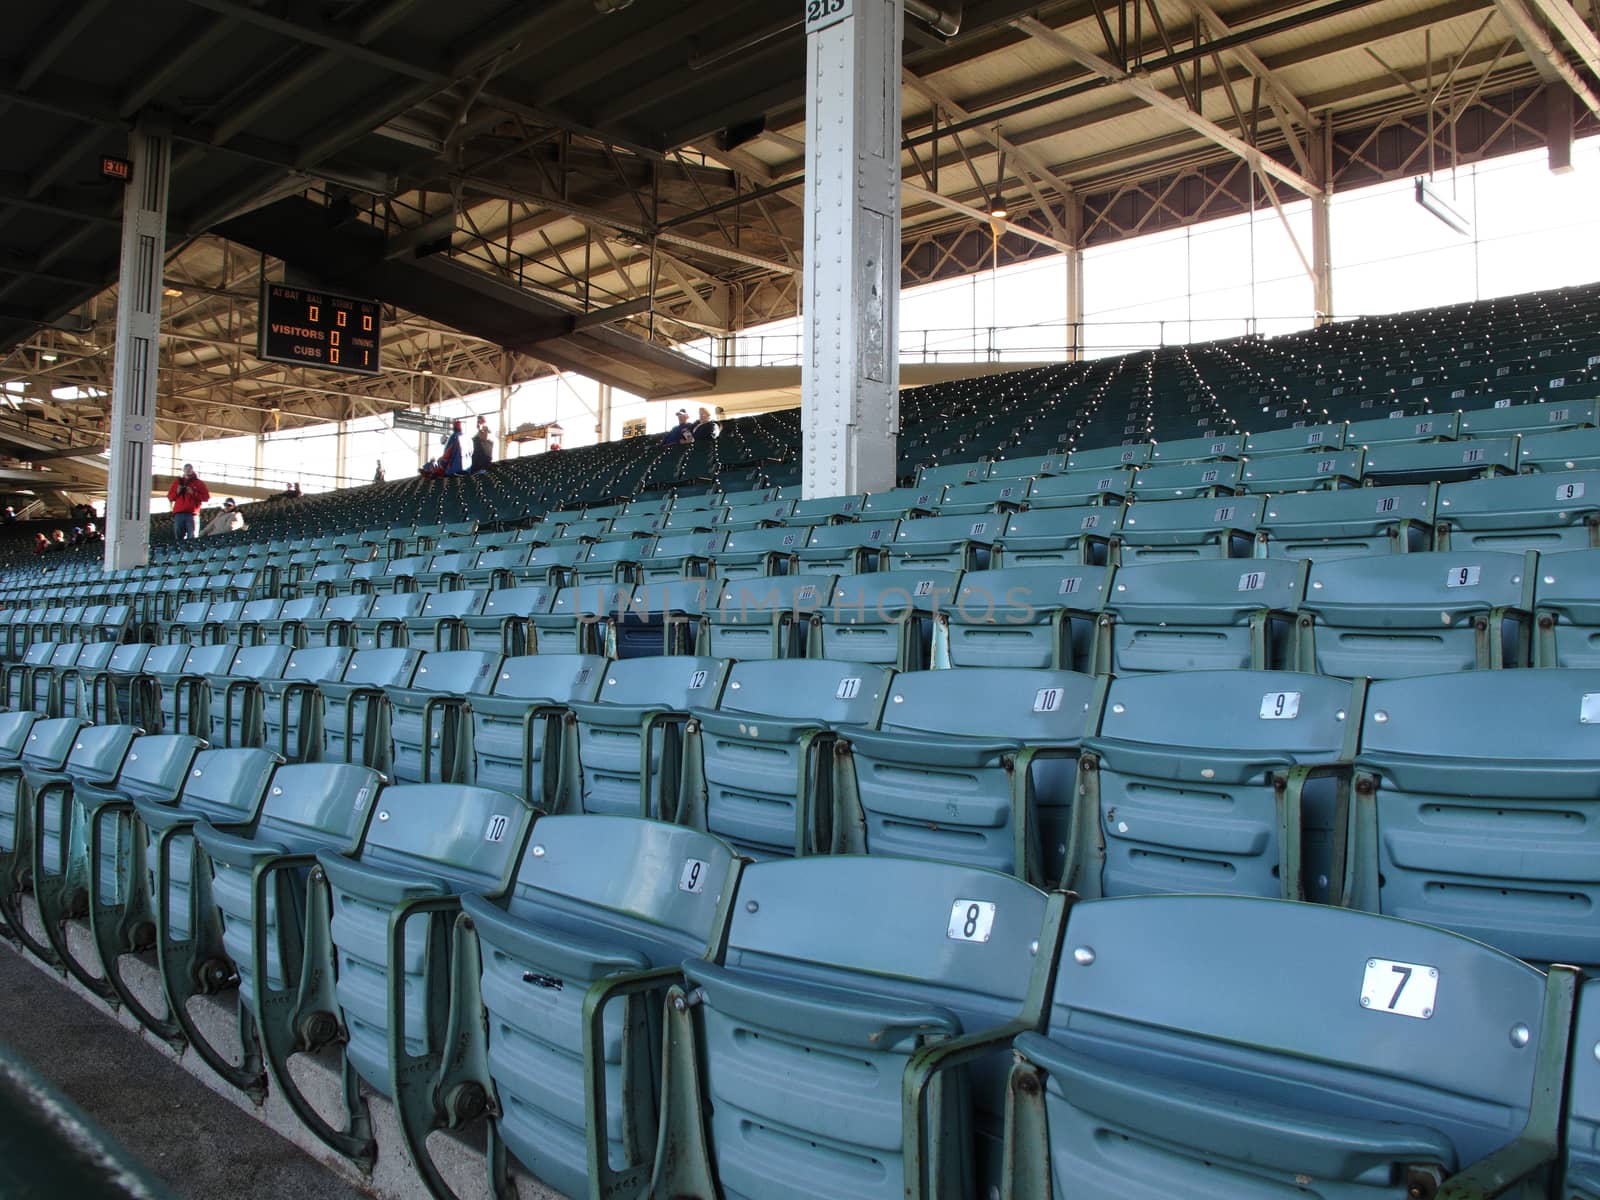 Famous Wrigley Field obstructed seating at the Cubs old time home ballpark.